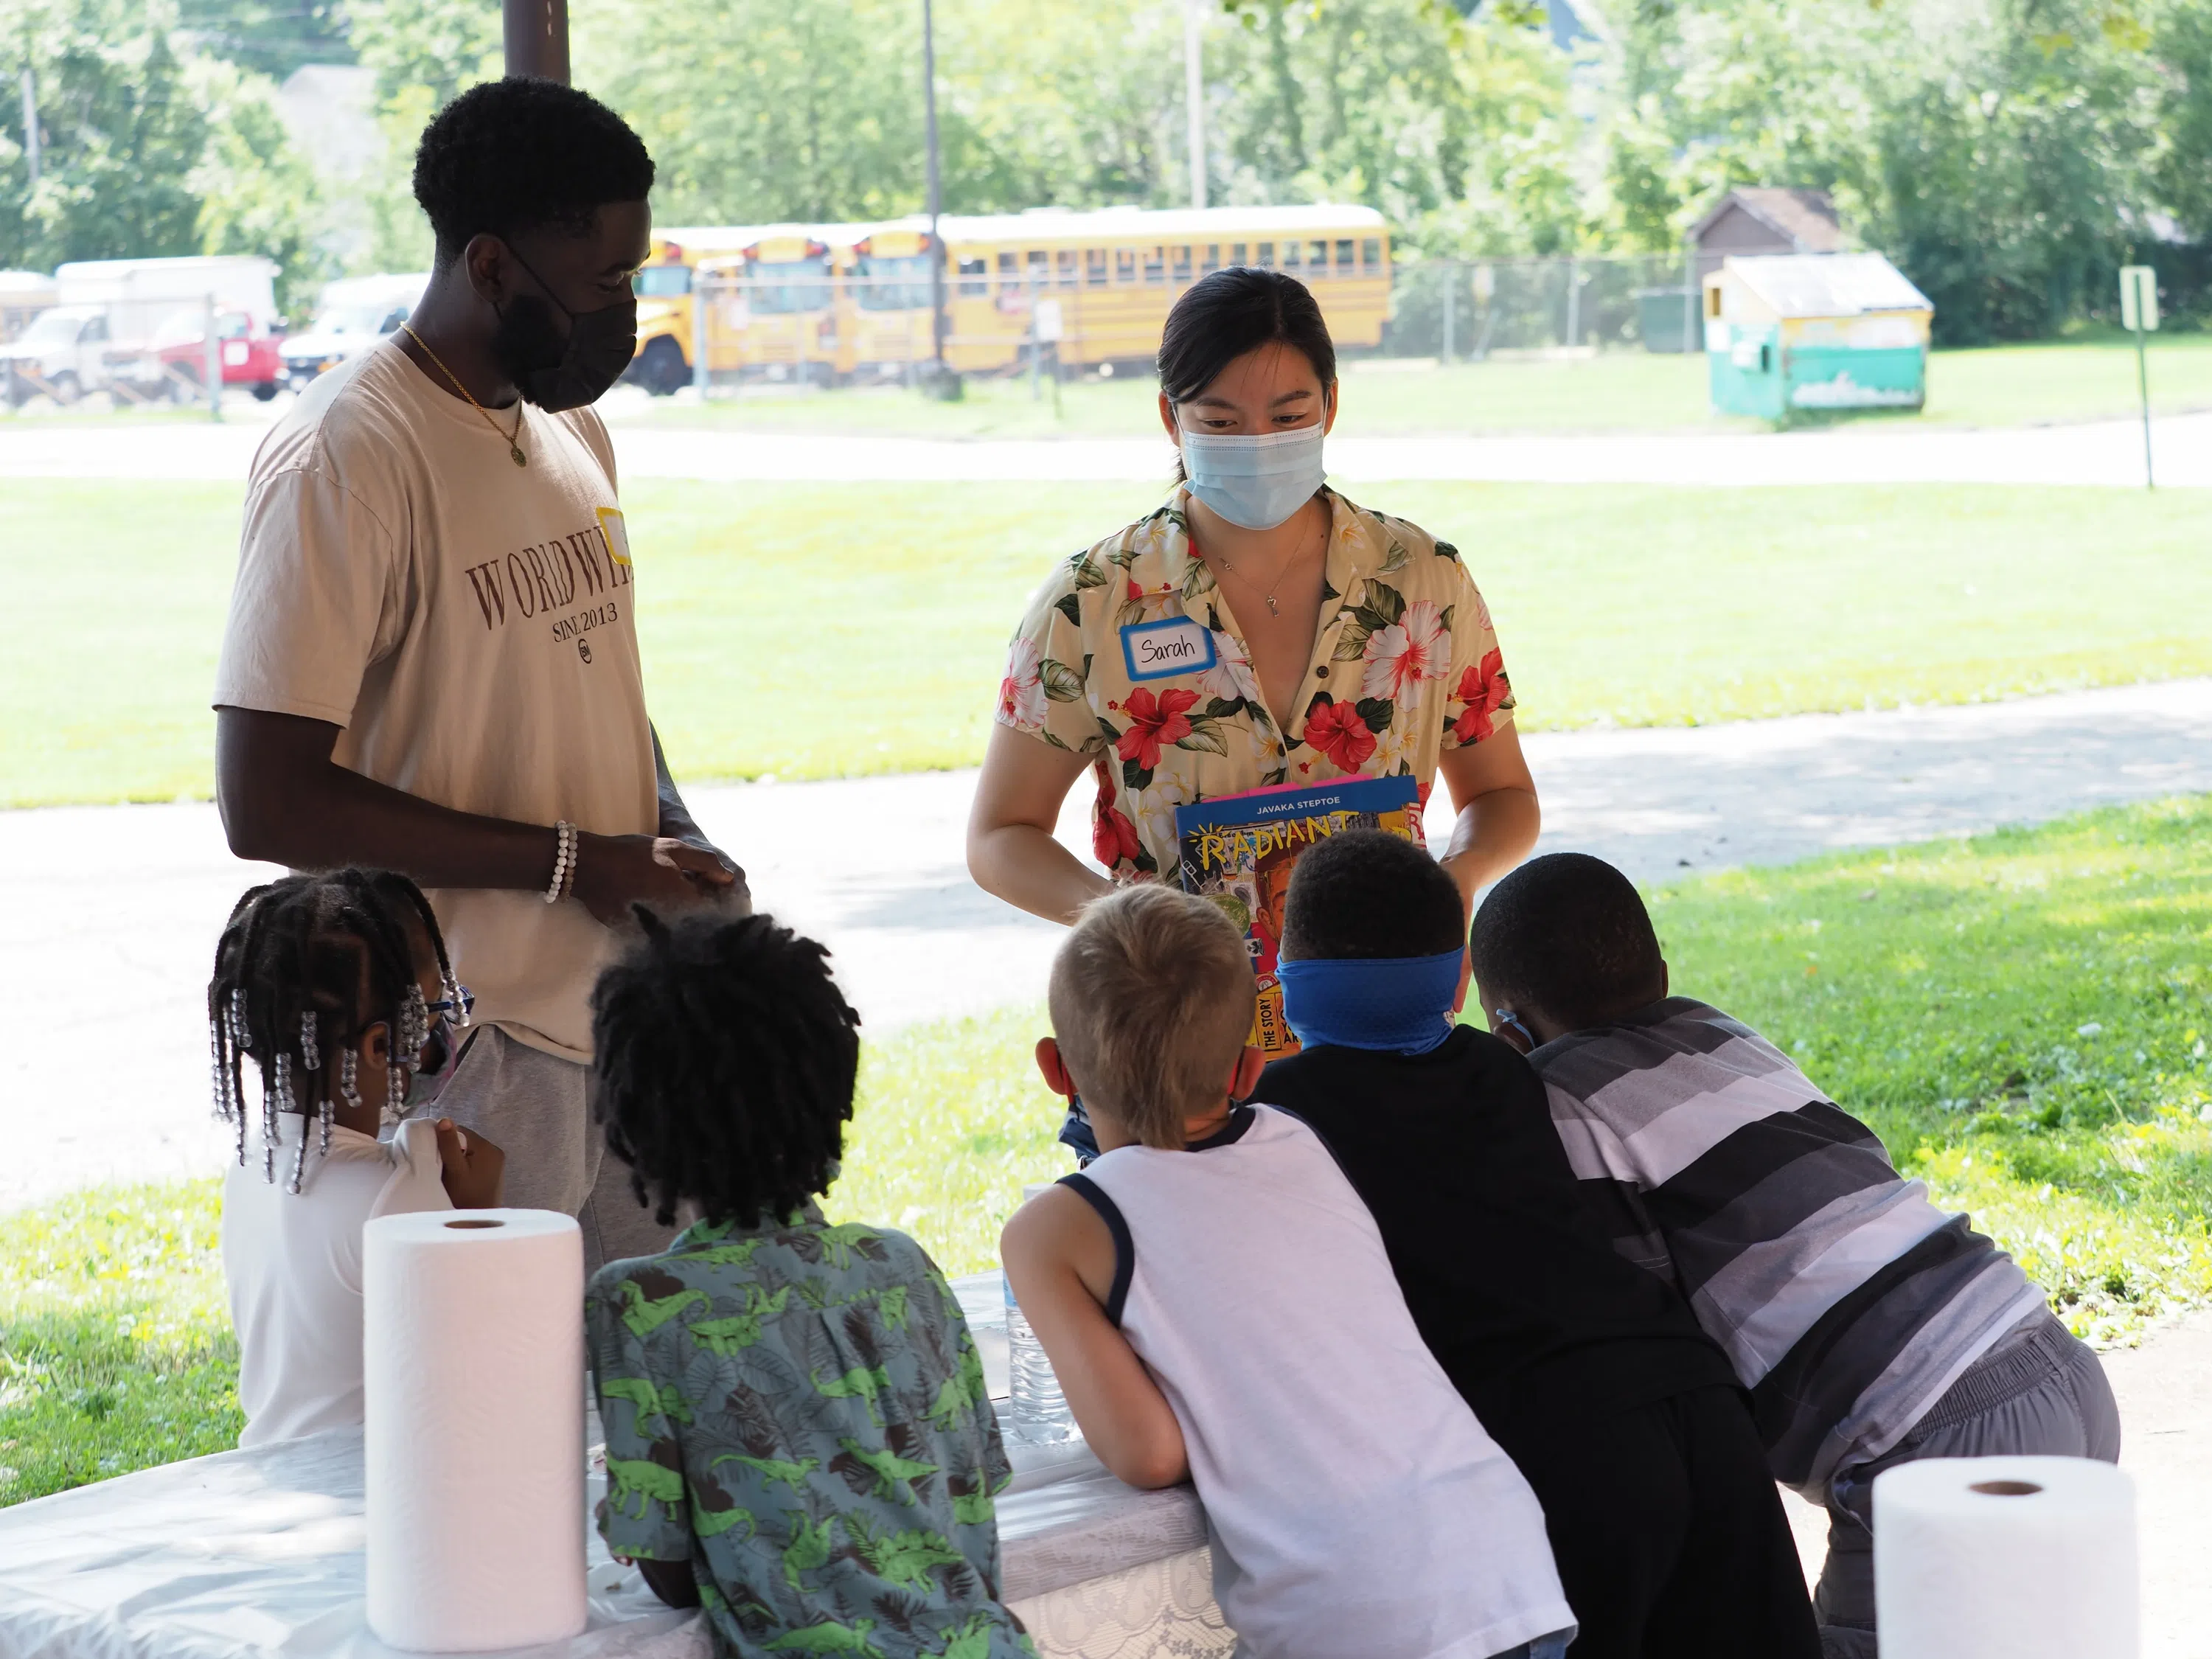 Oberlin's Bonner Scholars hold an outdoor summer education program with young children